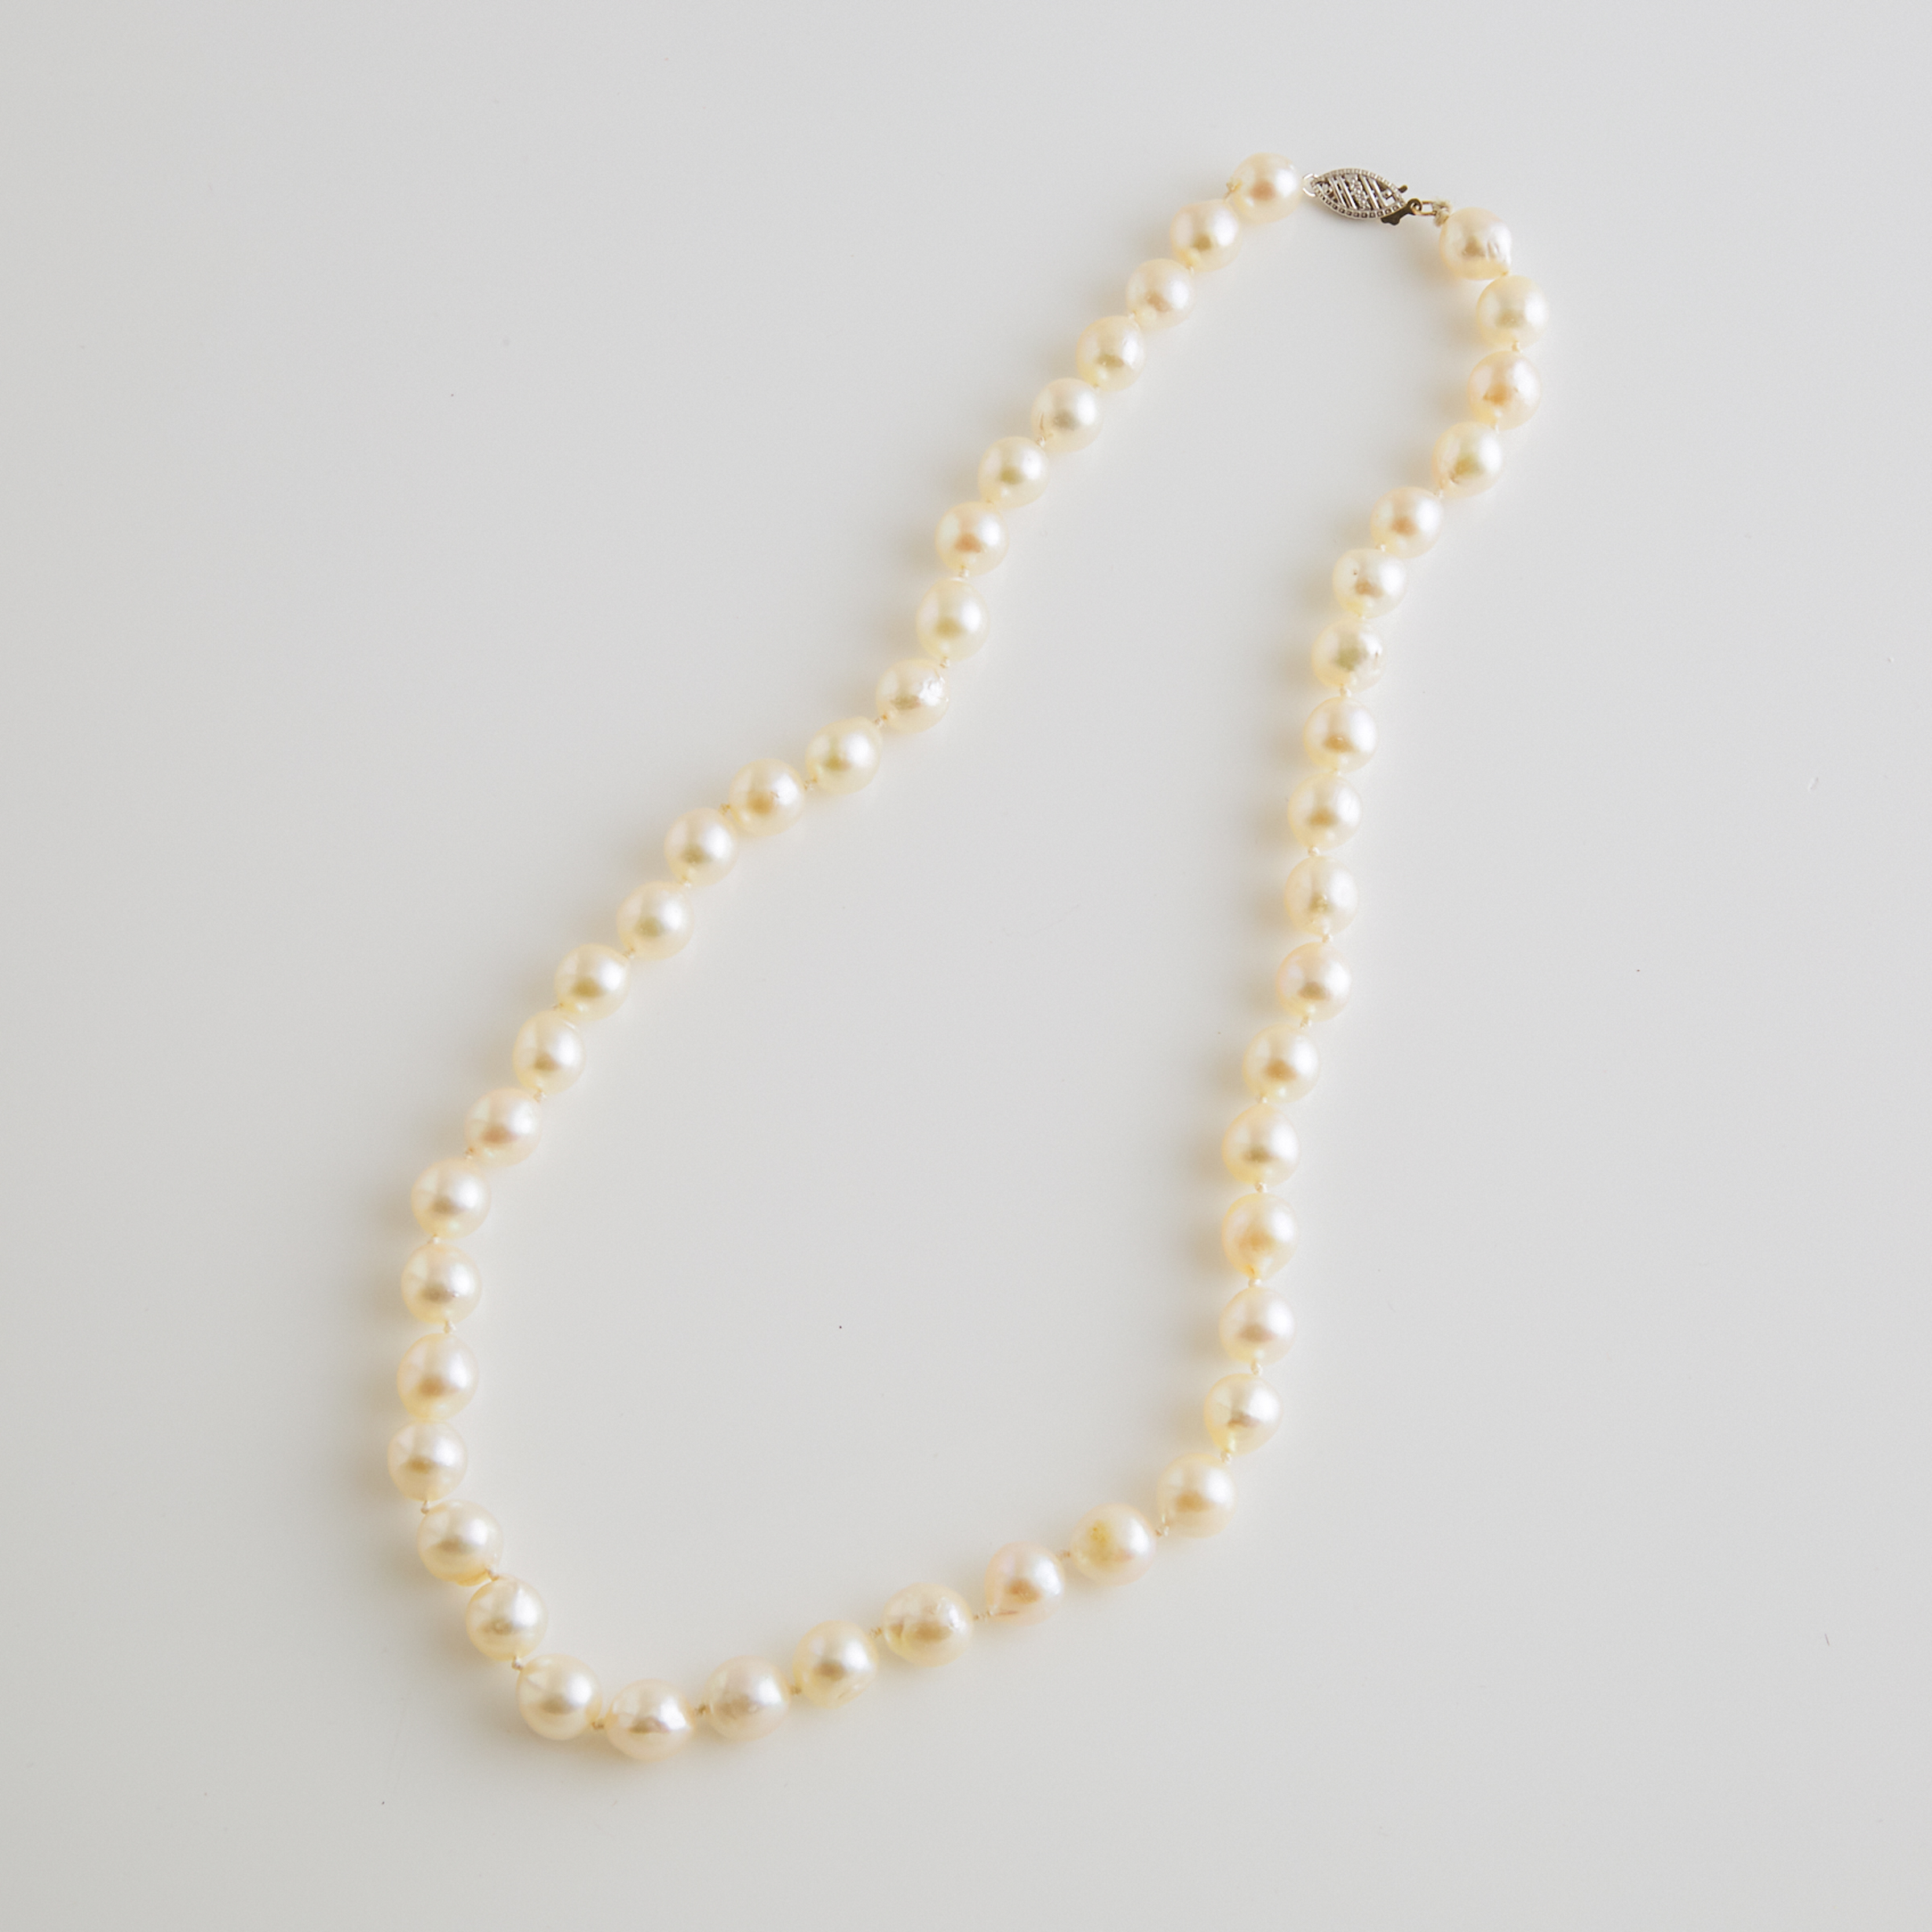 Single Strand Of Baroque Cultured Pearls